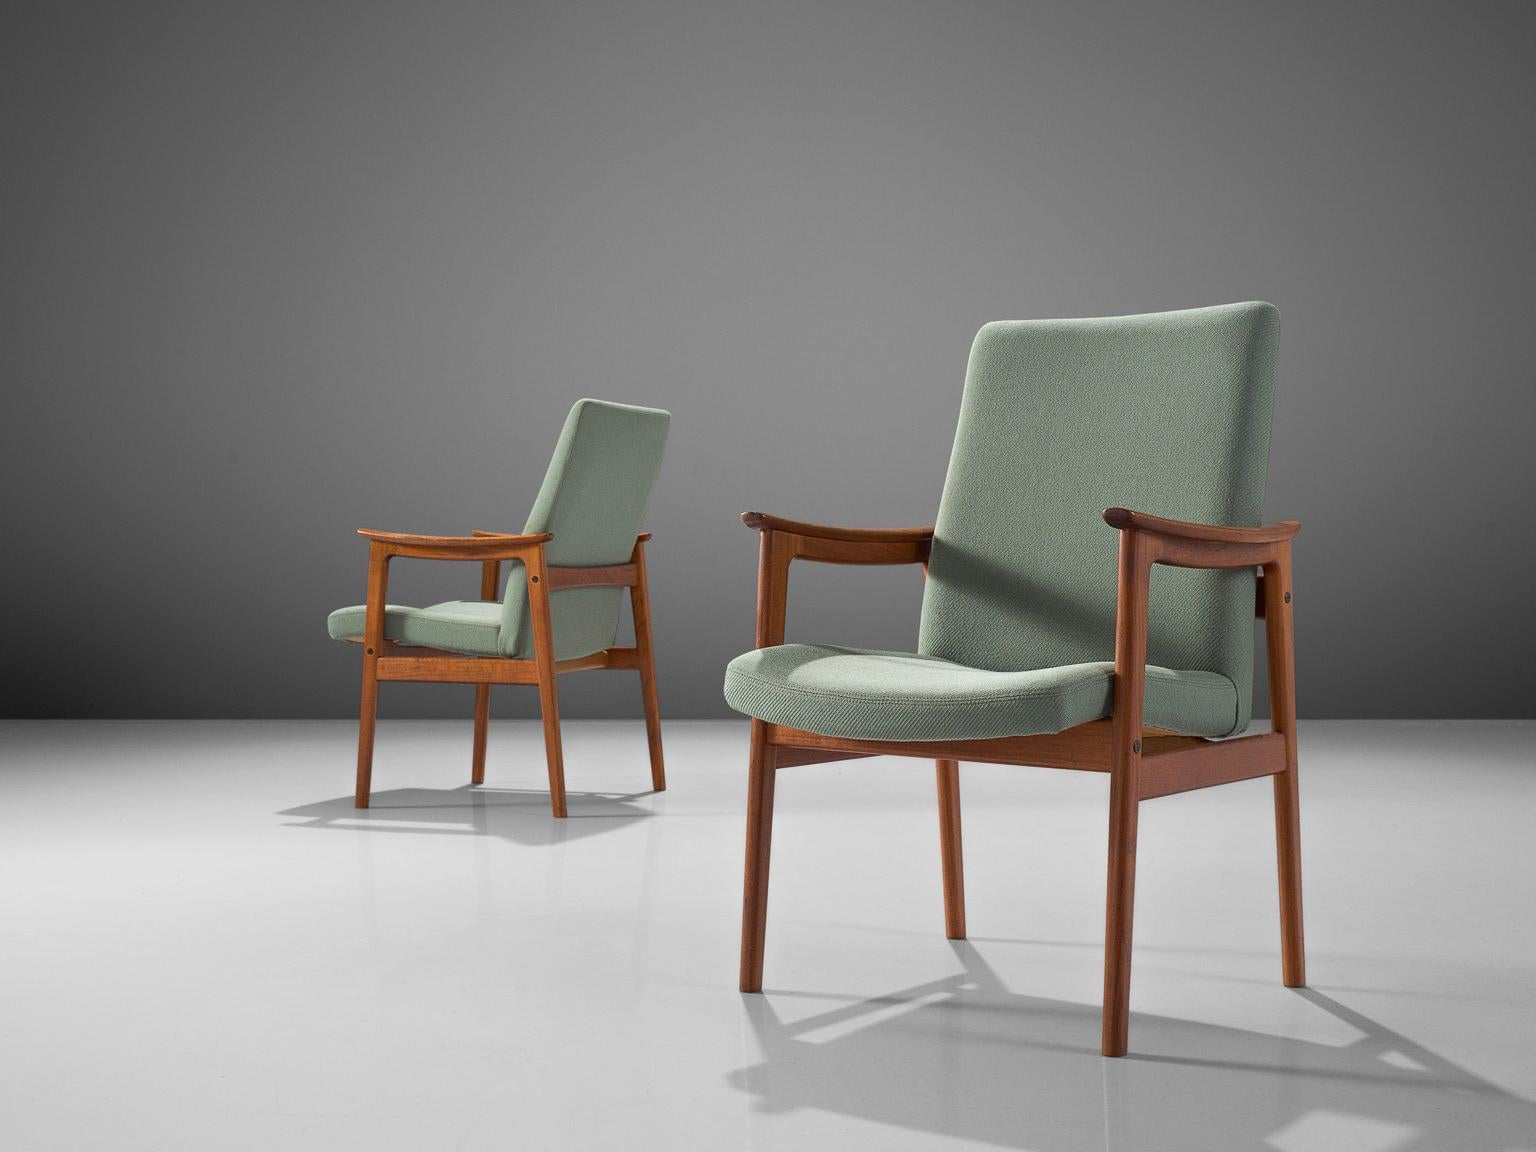 Pair of armchairs, teak, fabric, Scandinavia, 1950s. 

These elegant dining chairs with armrests are both stately and modest. These Scandinavian chairs have a teak frame with a beautiful visible grain. The armrests are nicely shaped in an organic